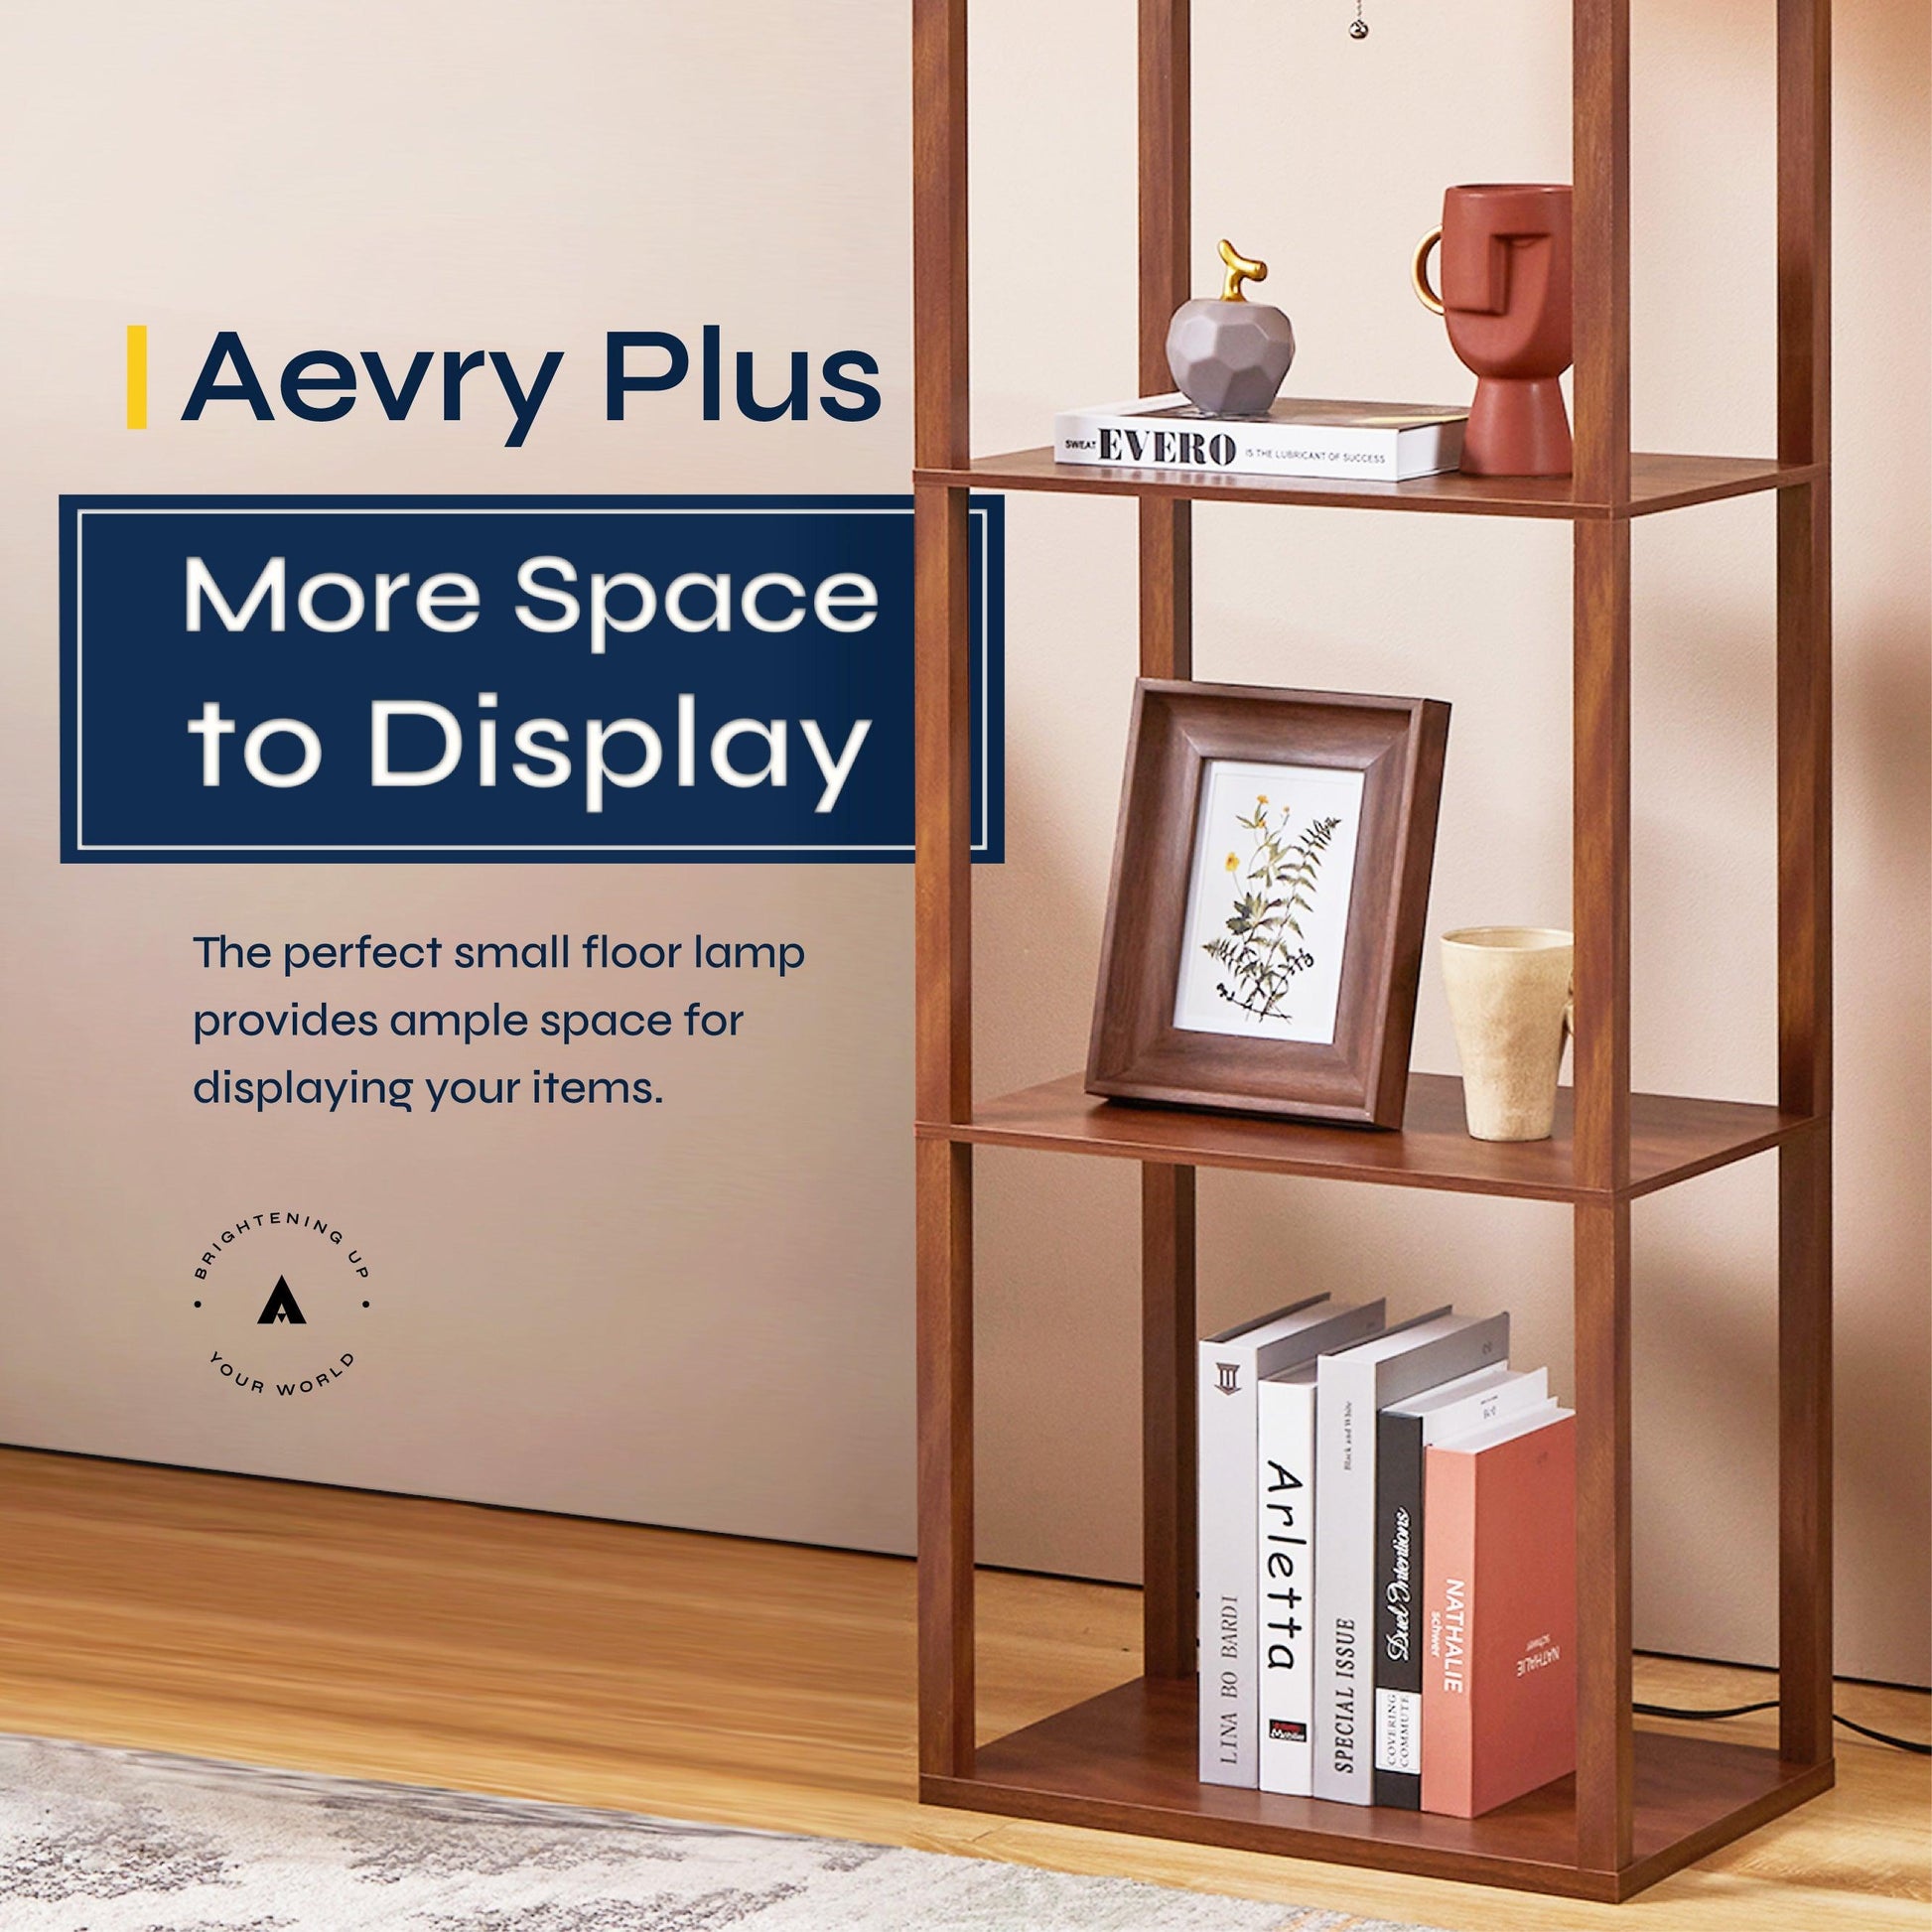 ATAMIN Avery Plus - 63" Floor Lamp with Shelves, LED Bulb Included